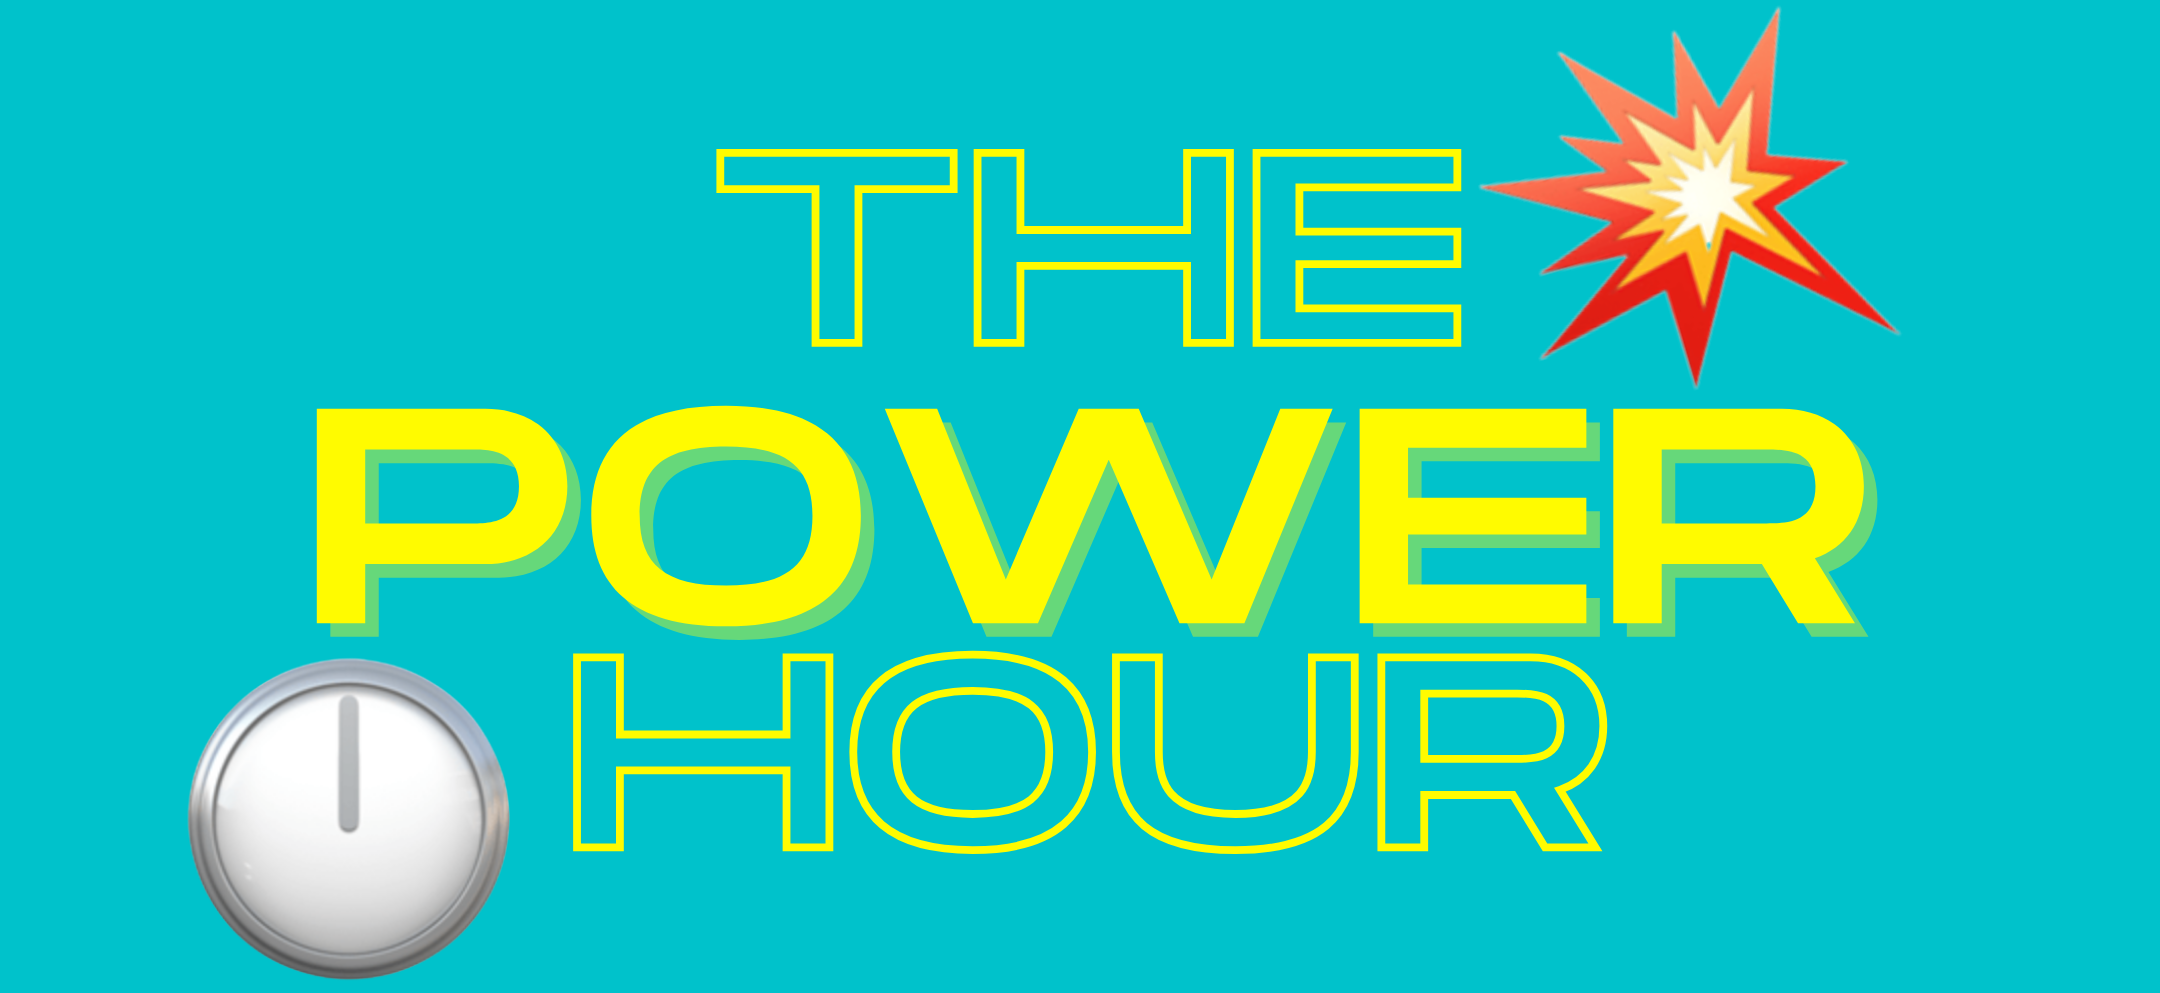 The Power Hour